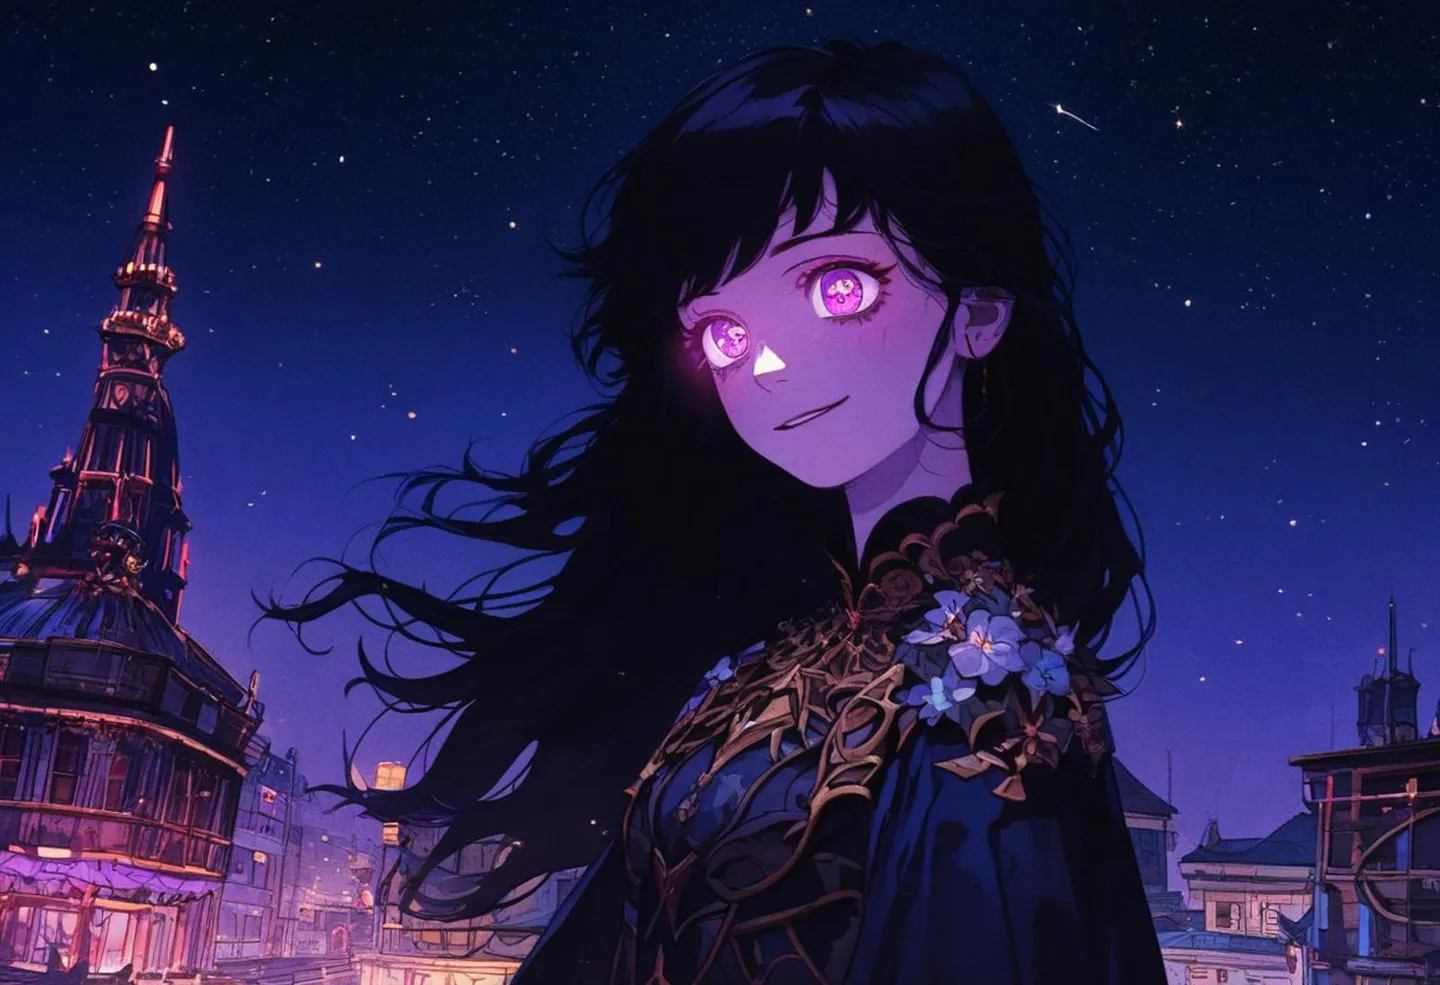 Anime-style girl with glowing eyes and intricate floral designs on her outfit standing in front of a cityscape at night, created using Stable Diffusion.